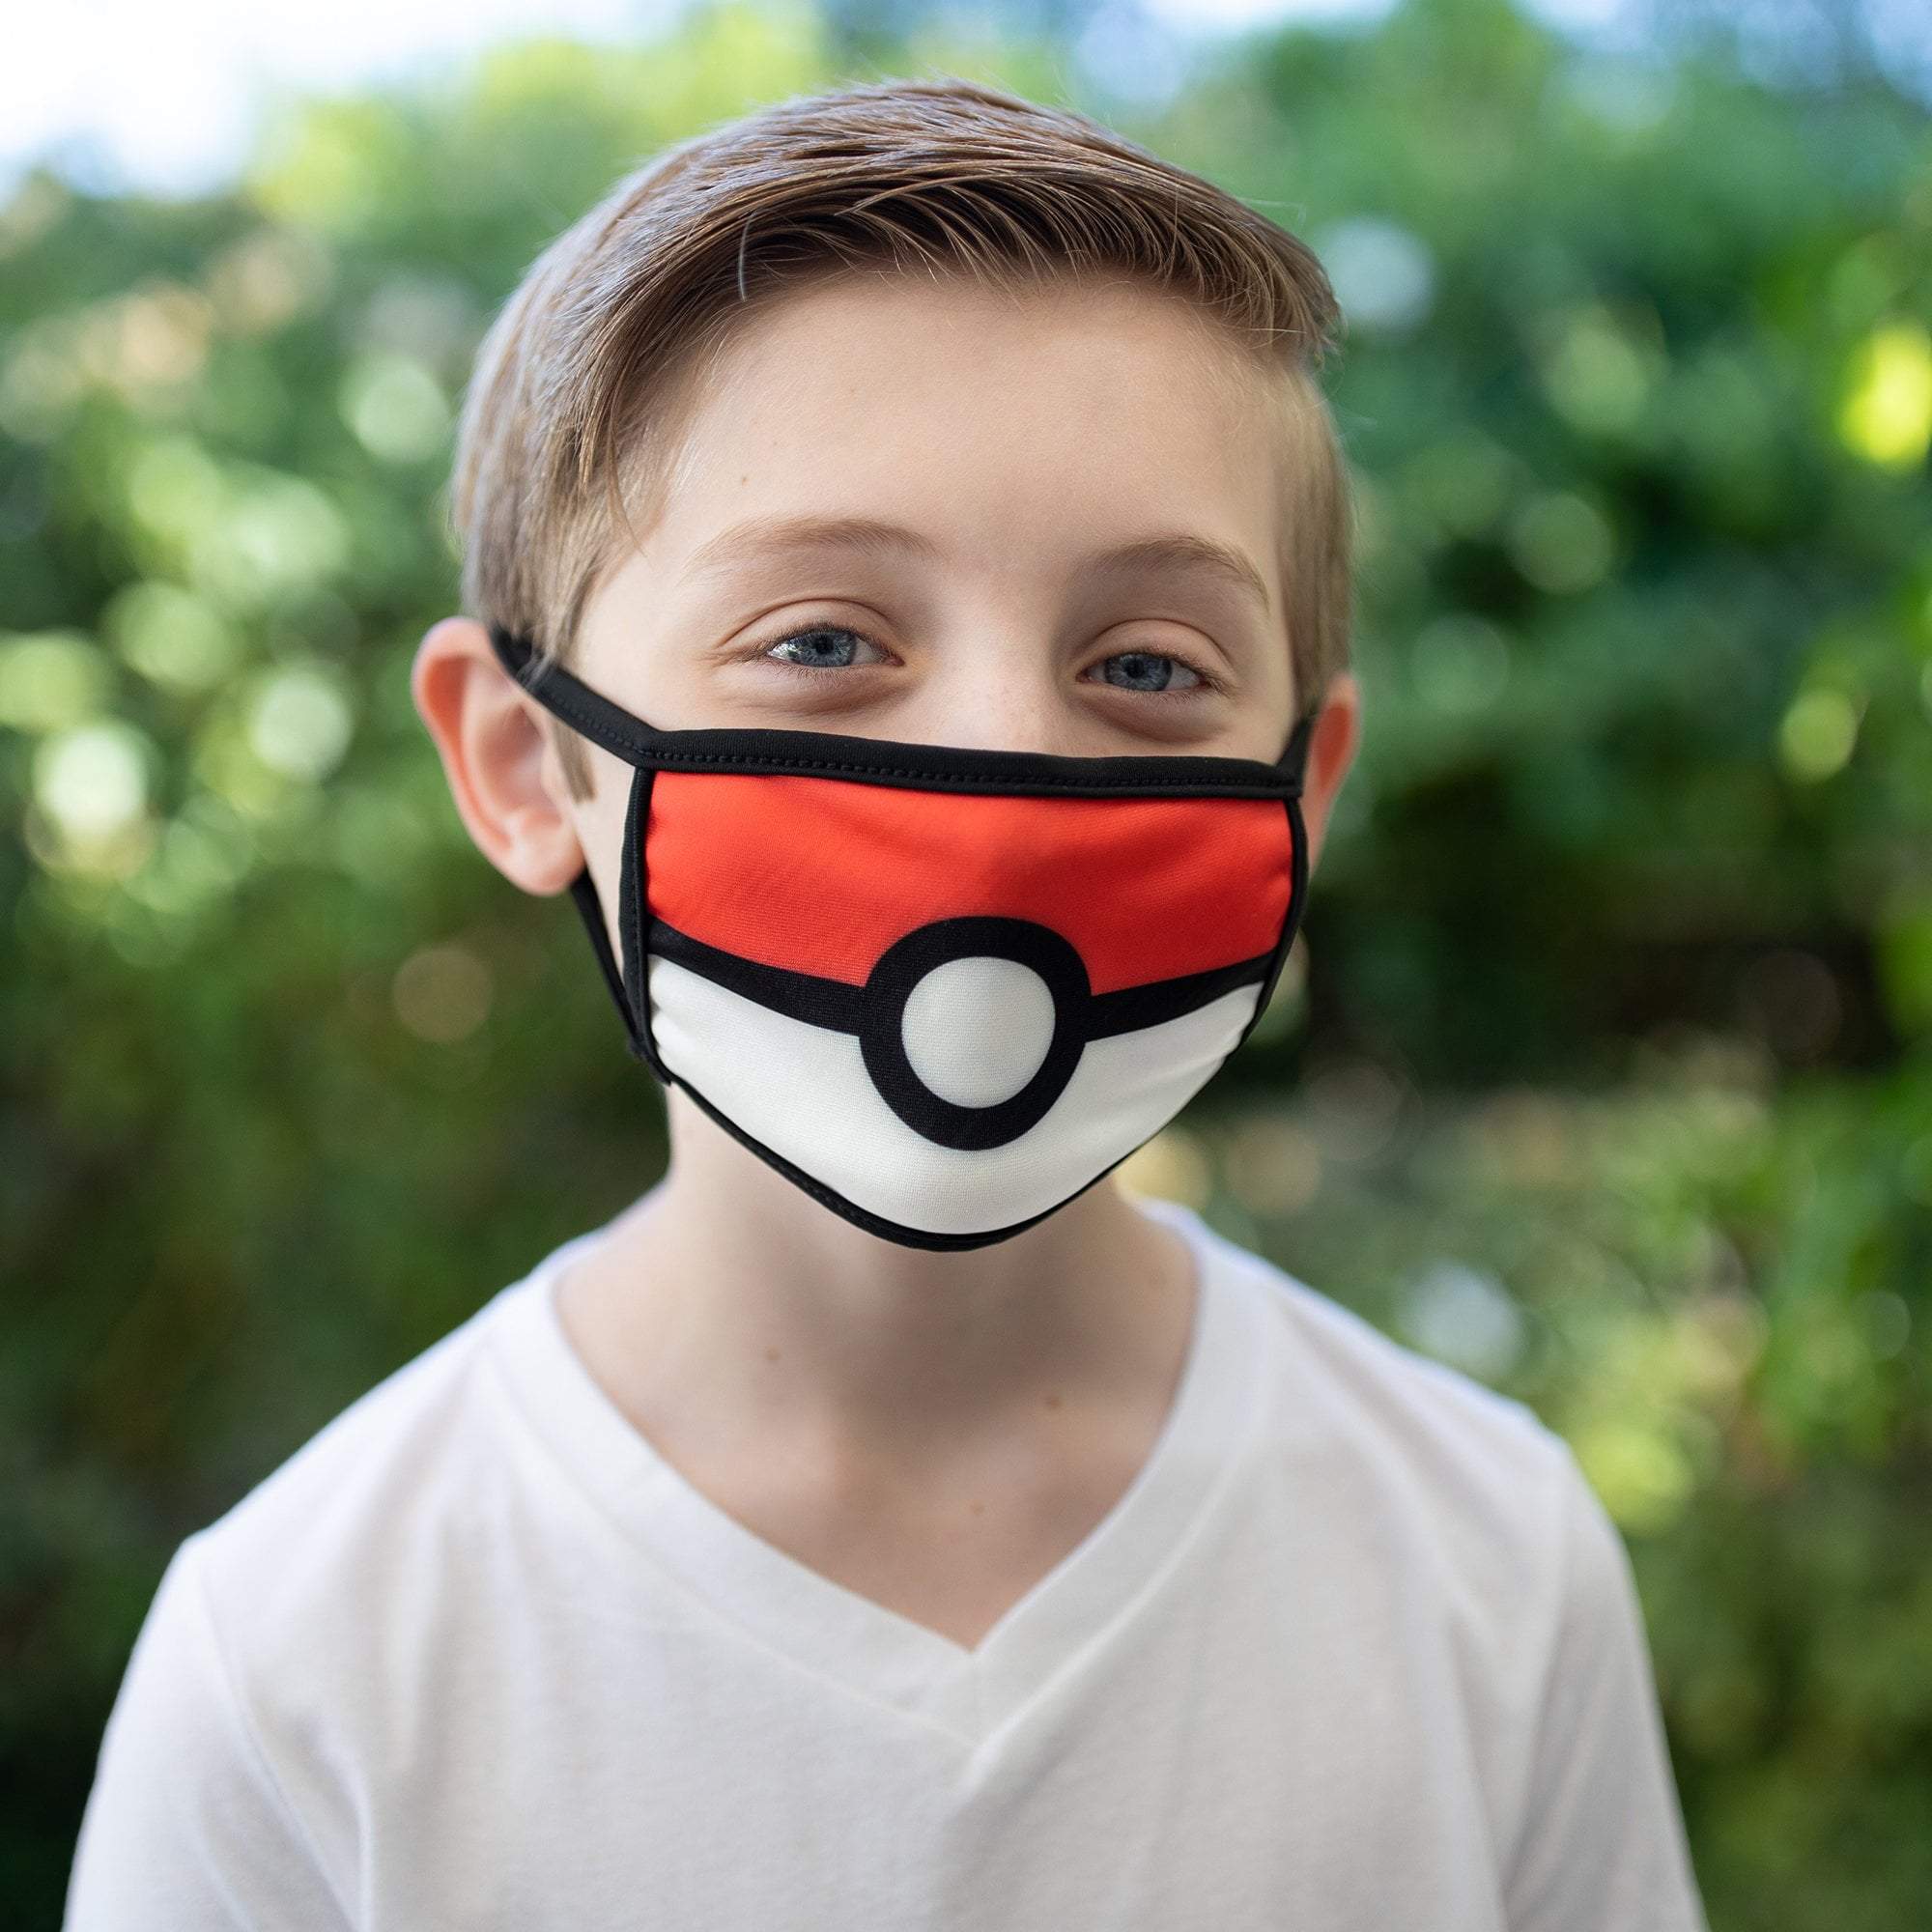 secuestrar Calle rutina Kids Size, Pokemon Inspired Pikachu Mask, Pokemon Face Mask, Pokemon Mask,  Reversible 2 ply Polyester Reusable Washable Face Mask Covers w/ Filter  Slot by Bartact | Bartact